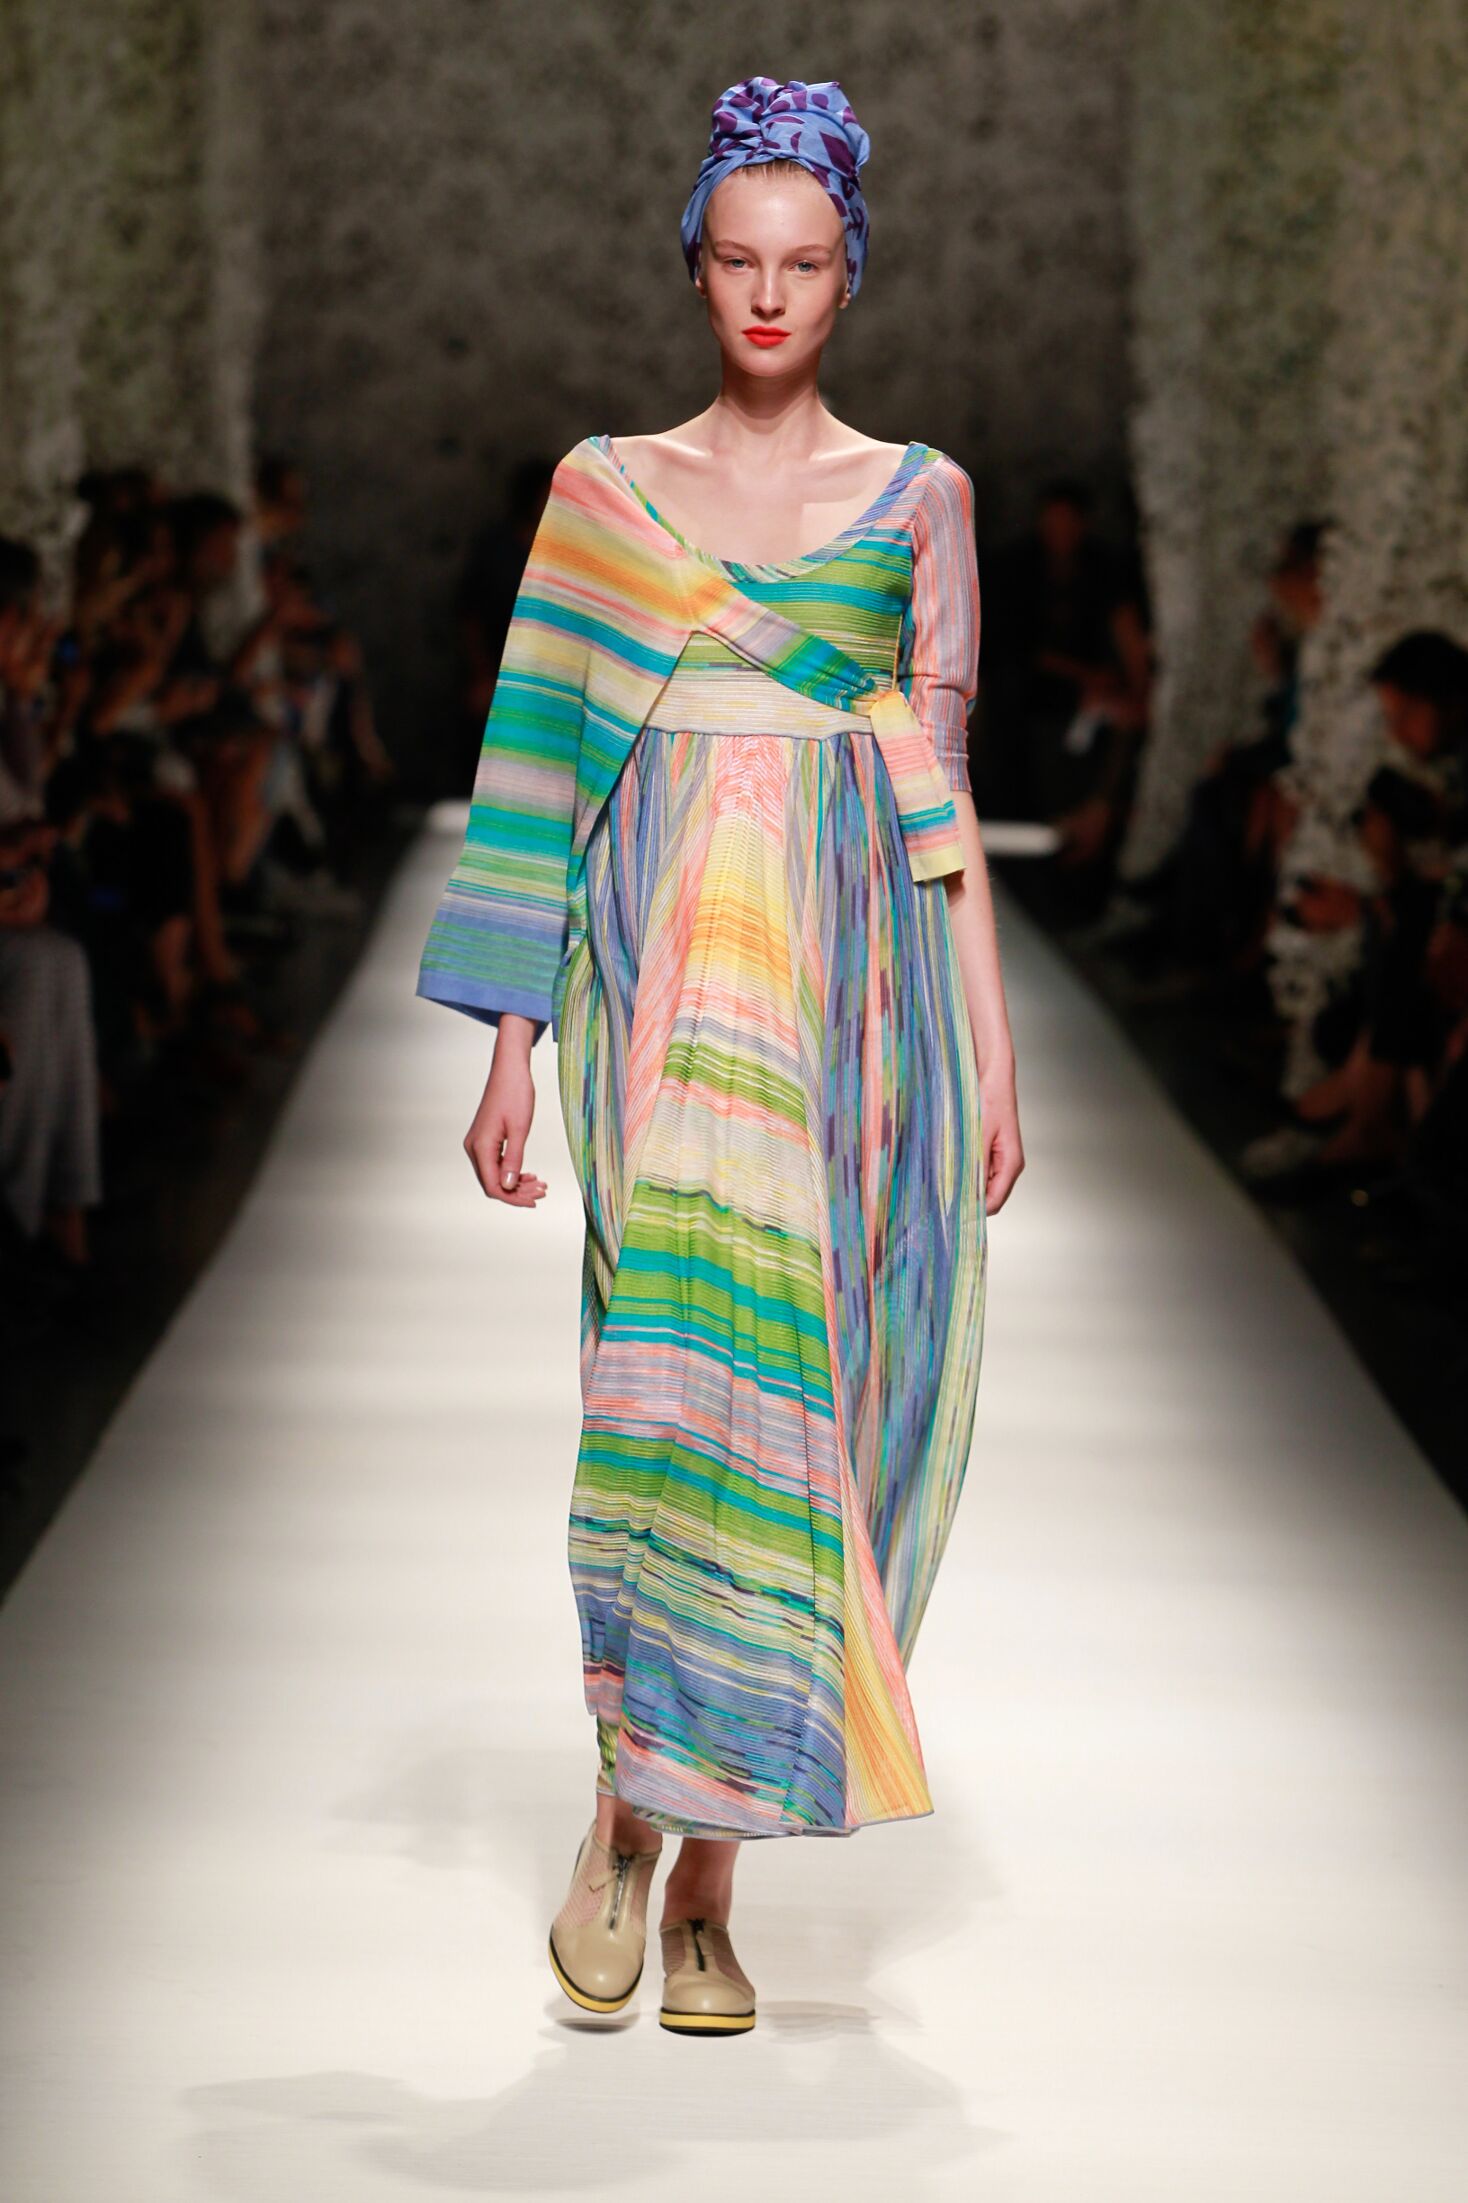 MISSONI SUMMER 2015 WOMEN’S COLLECTION | The Skinny Beep